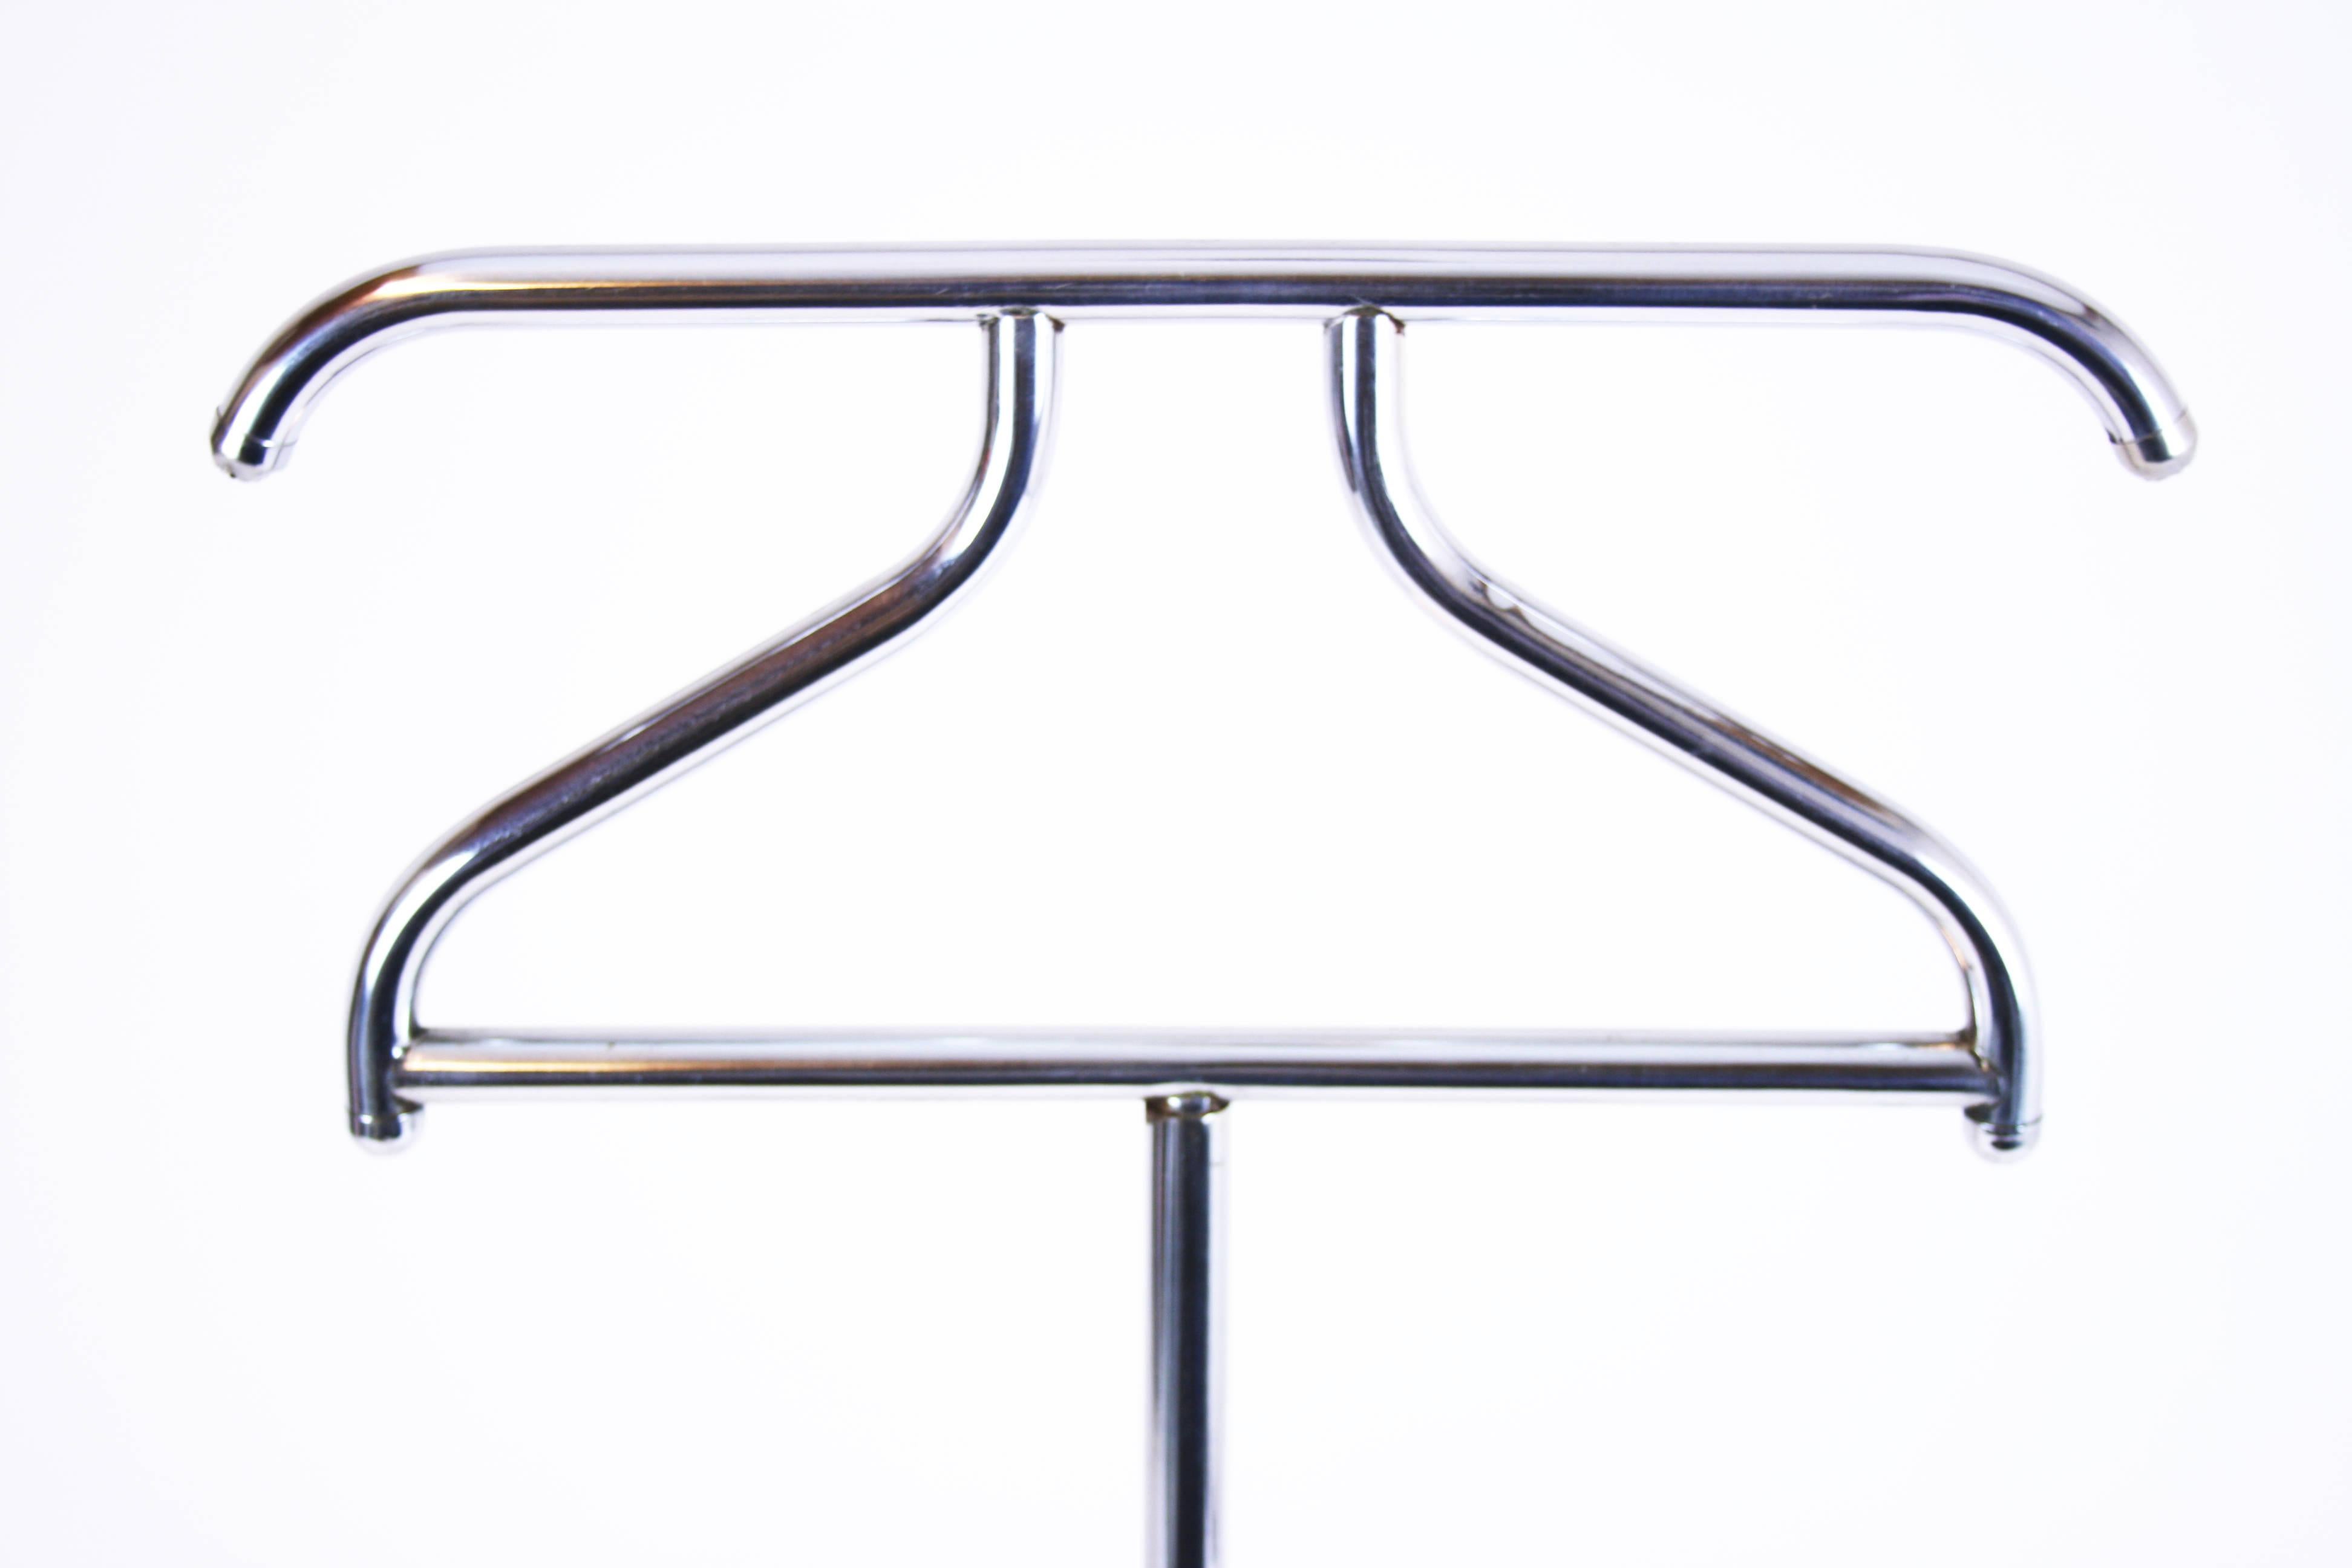 Coatrack in Bauhaus design Art Deco Czechoslovakia 1930s tube steel by manufacturer Jala. A very puristic styled piece showing the typical design features of this period. An interesting characterful object worth to be observed from every viewing